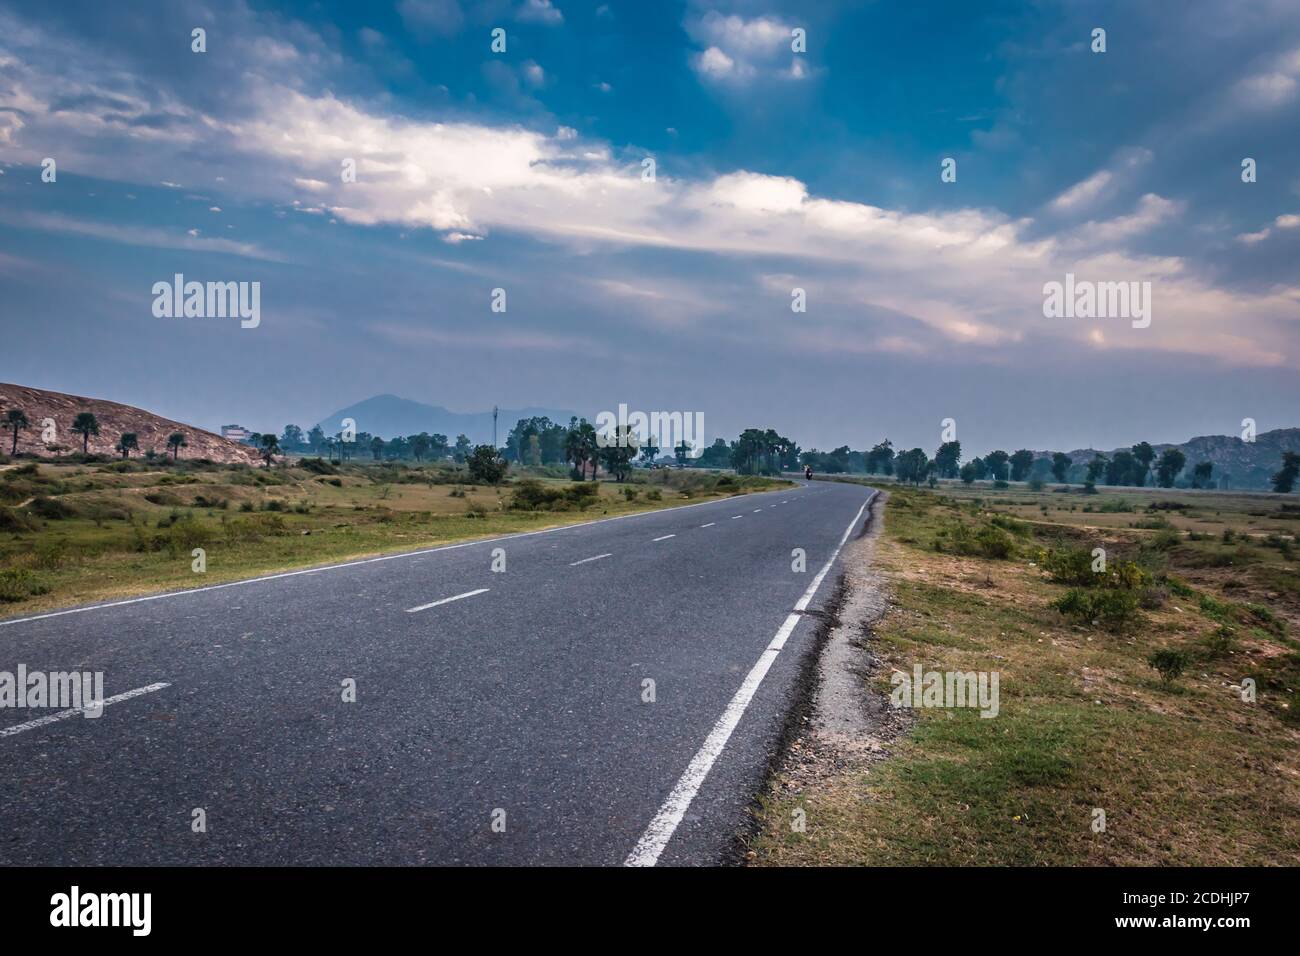 countryside empty rural road with mist and surrounded by mountains at morning image is taken at dashrath manjhi path gaya bihar India. It is showing t Stock Photo